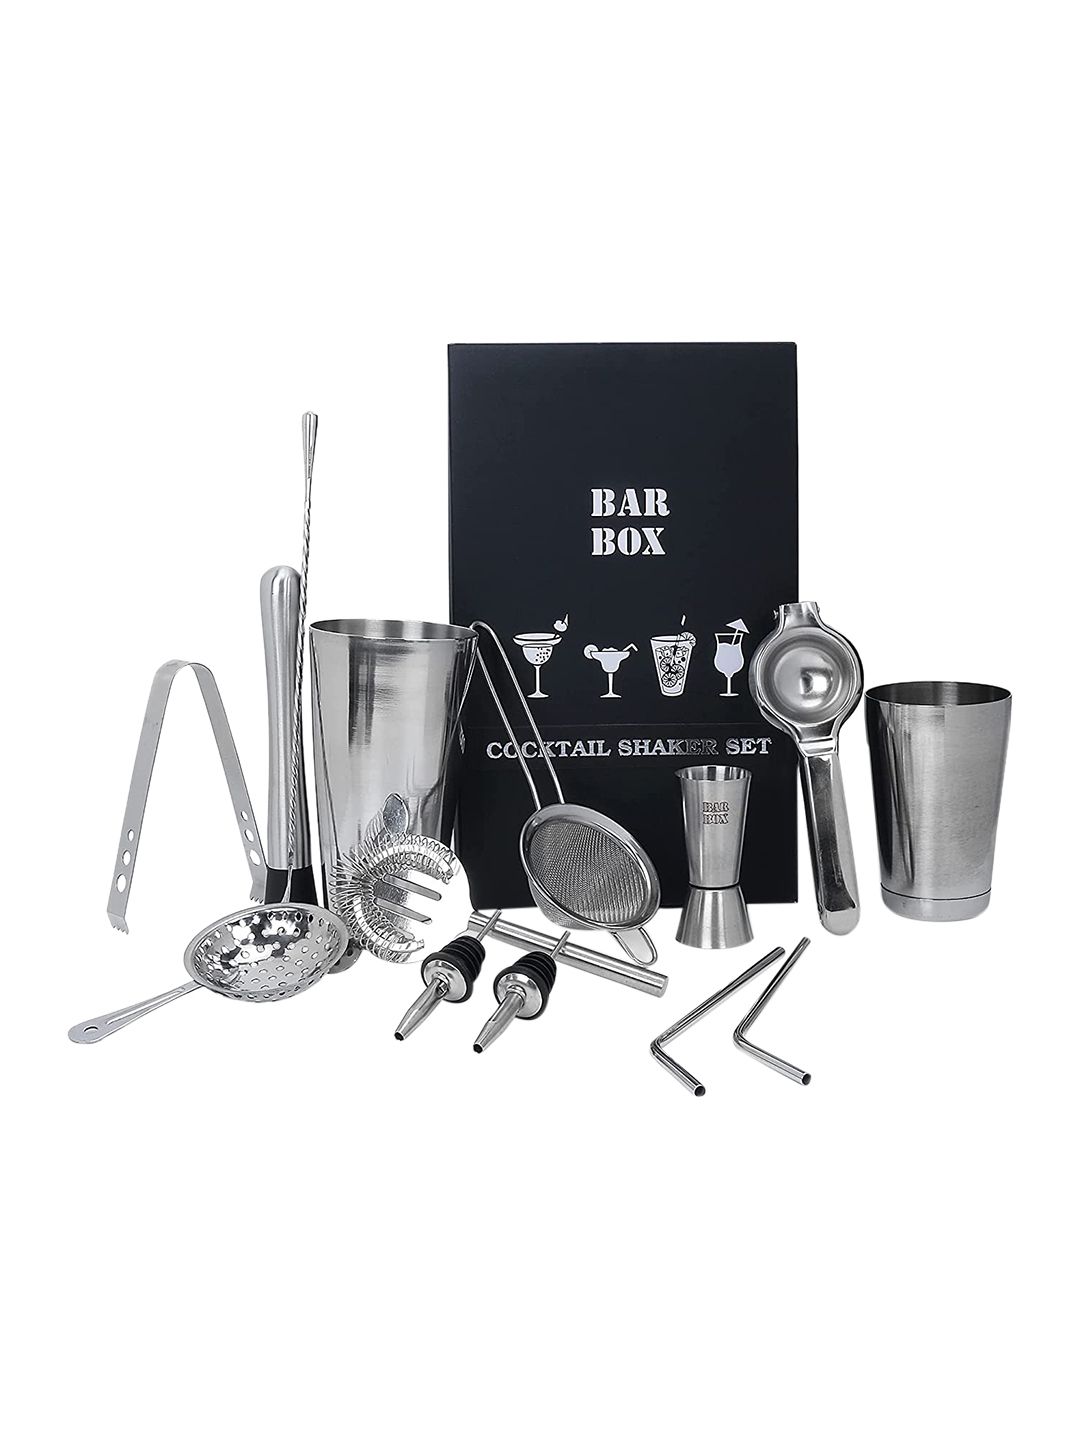 BAR BOX Silver-Toned 14-Pcs Cocktail Shaker Set Price in India